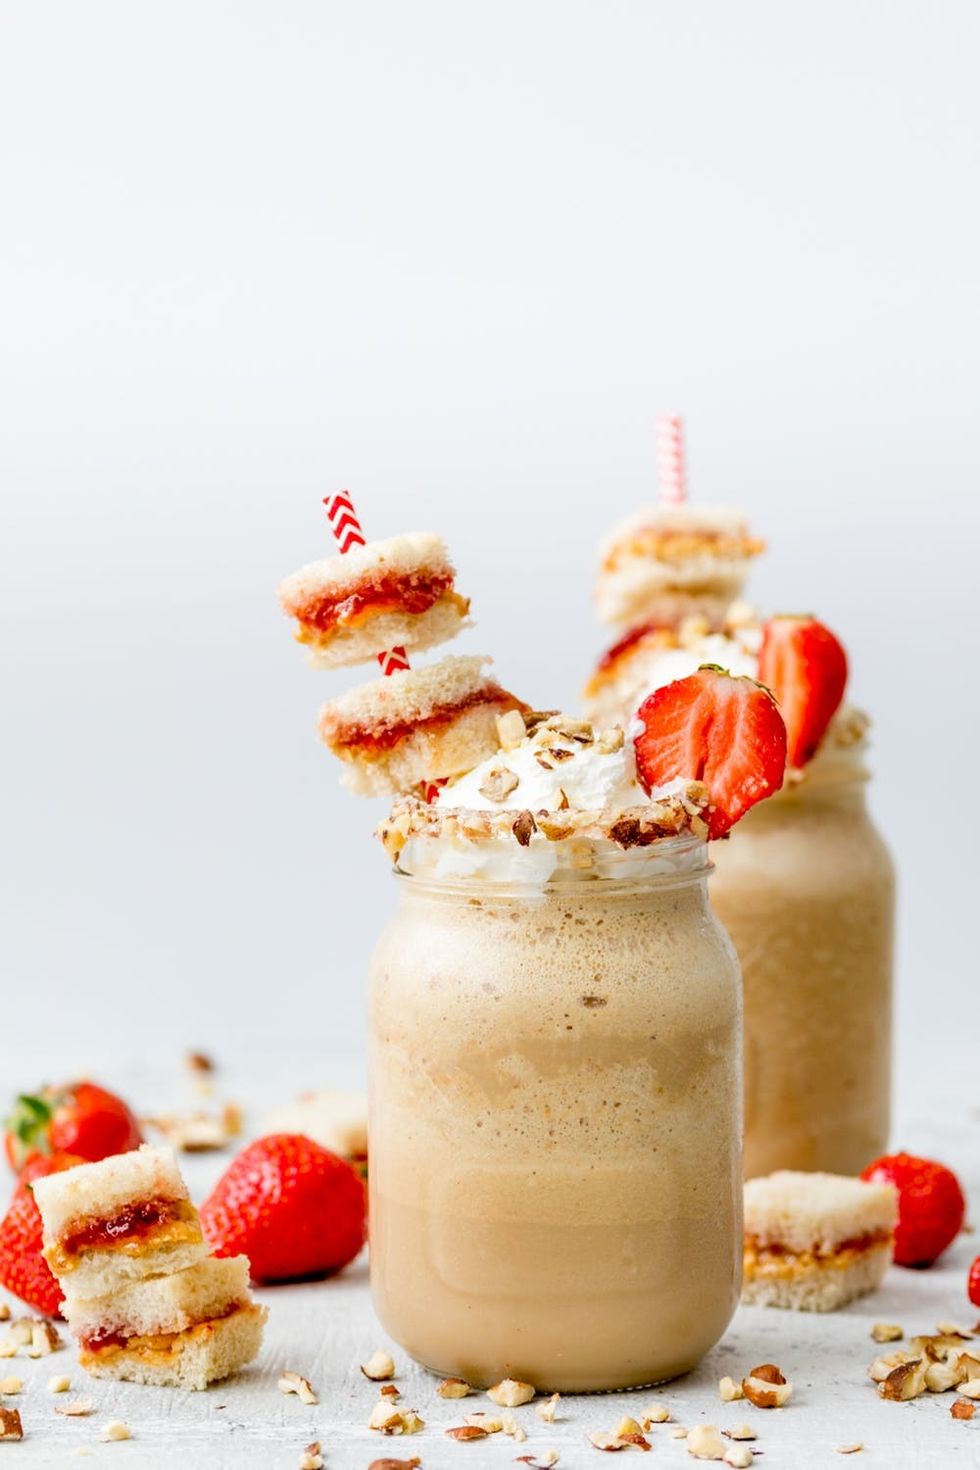 Our PB&J Frappuccino Recipe Is Lunch On The Go!